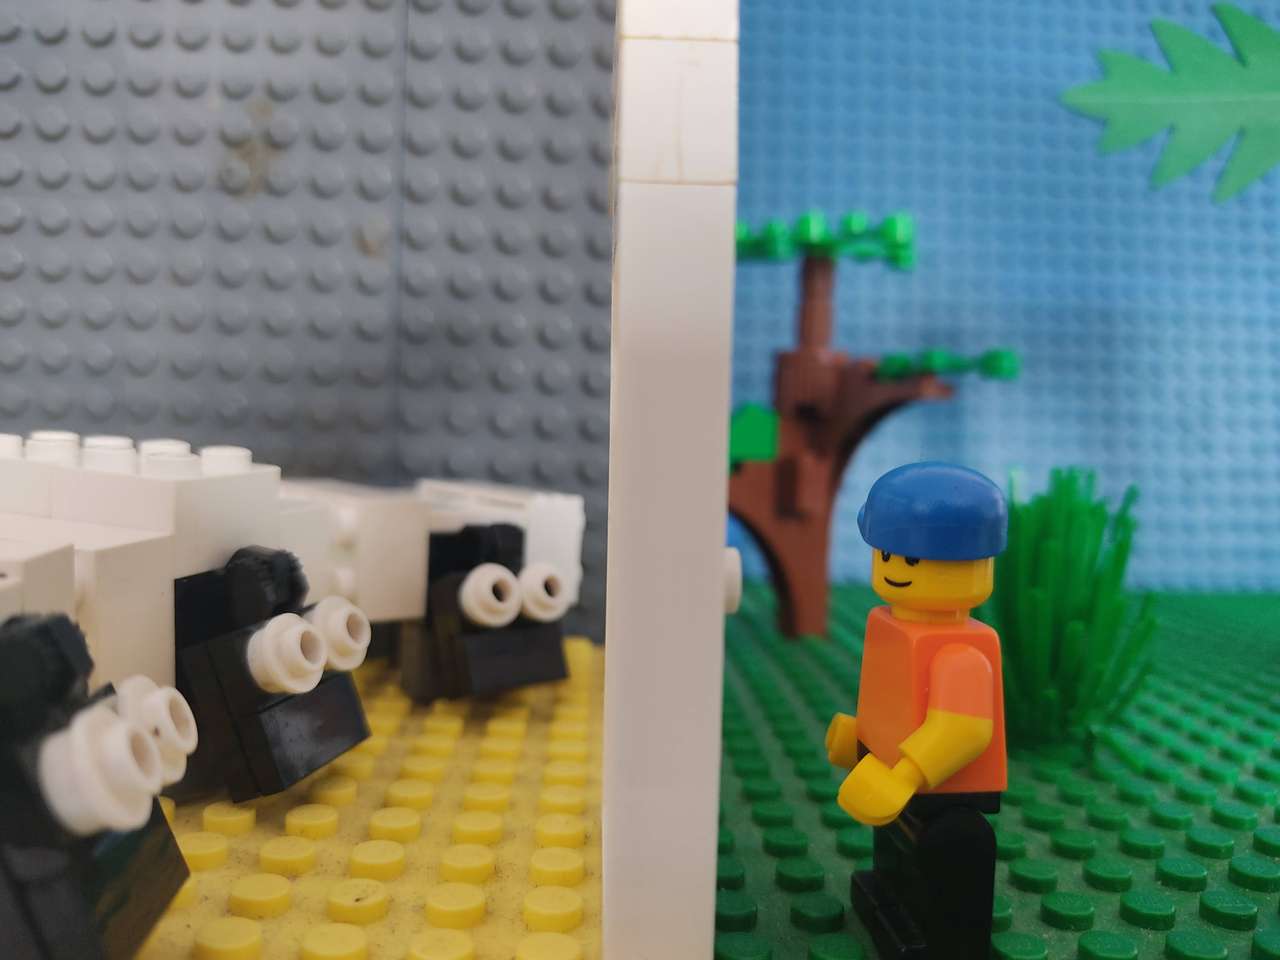 lego sheep online puzzle